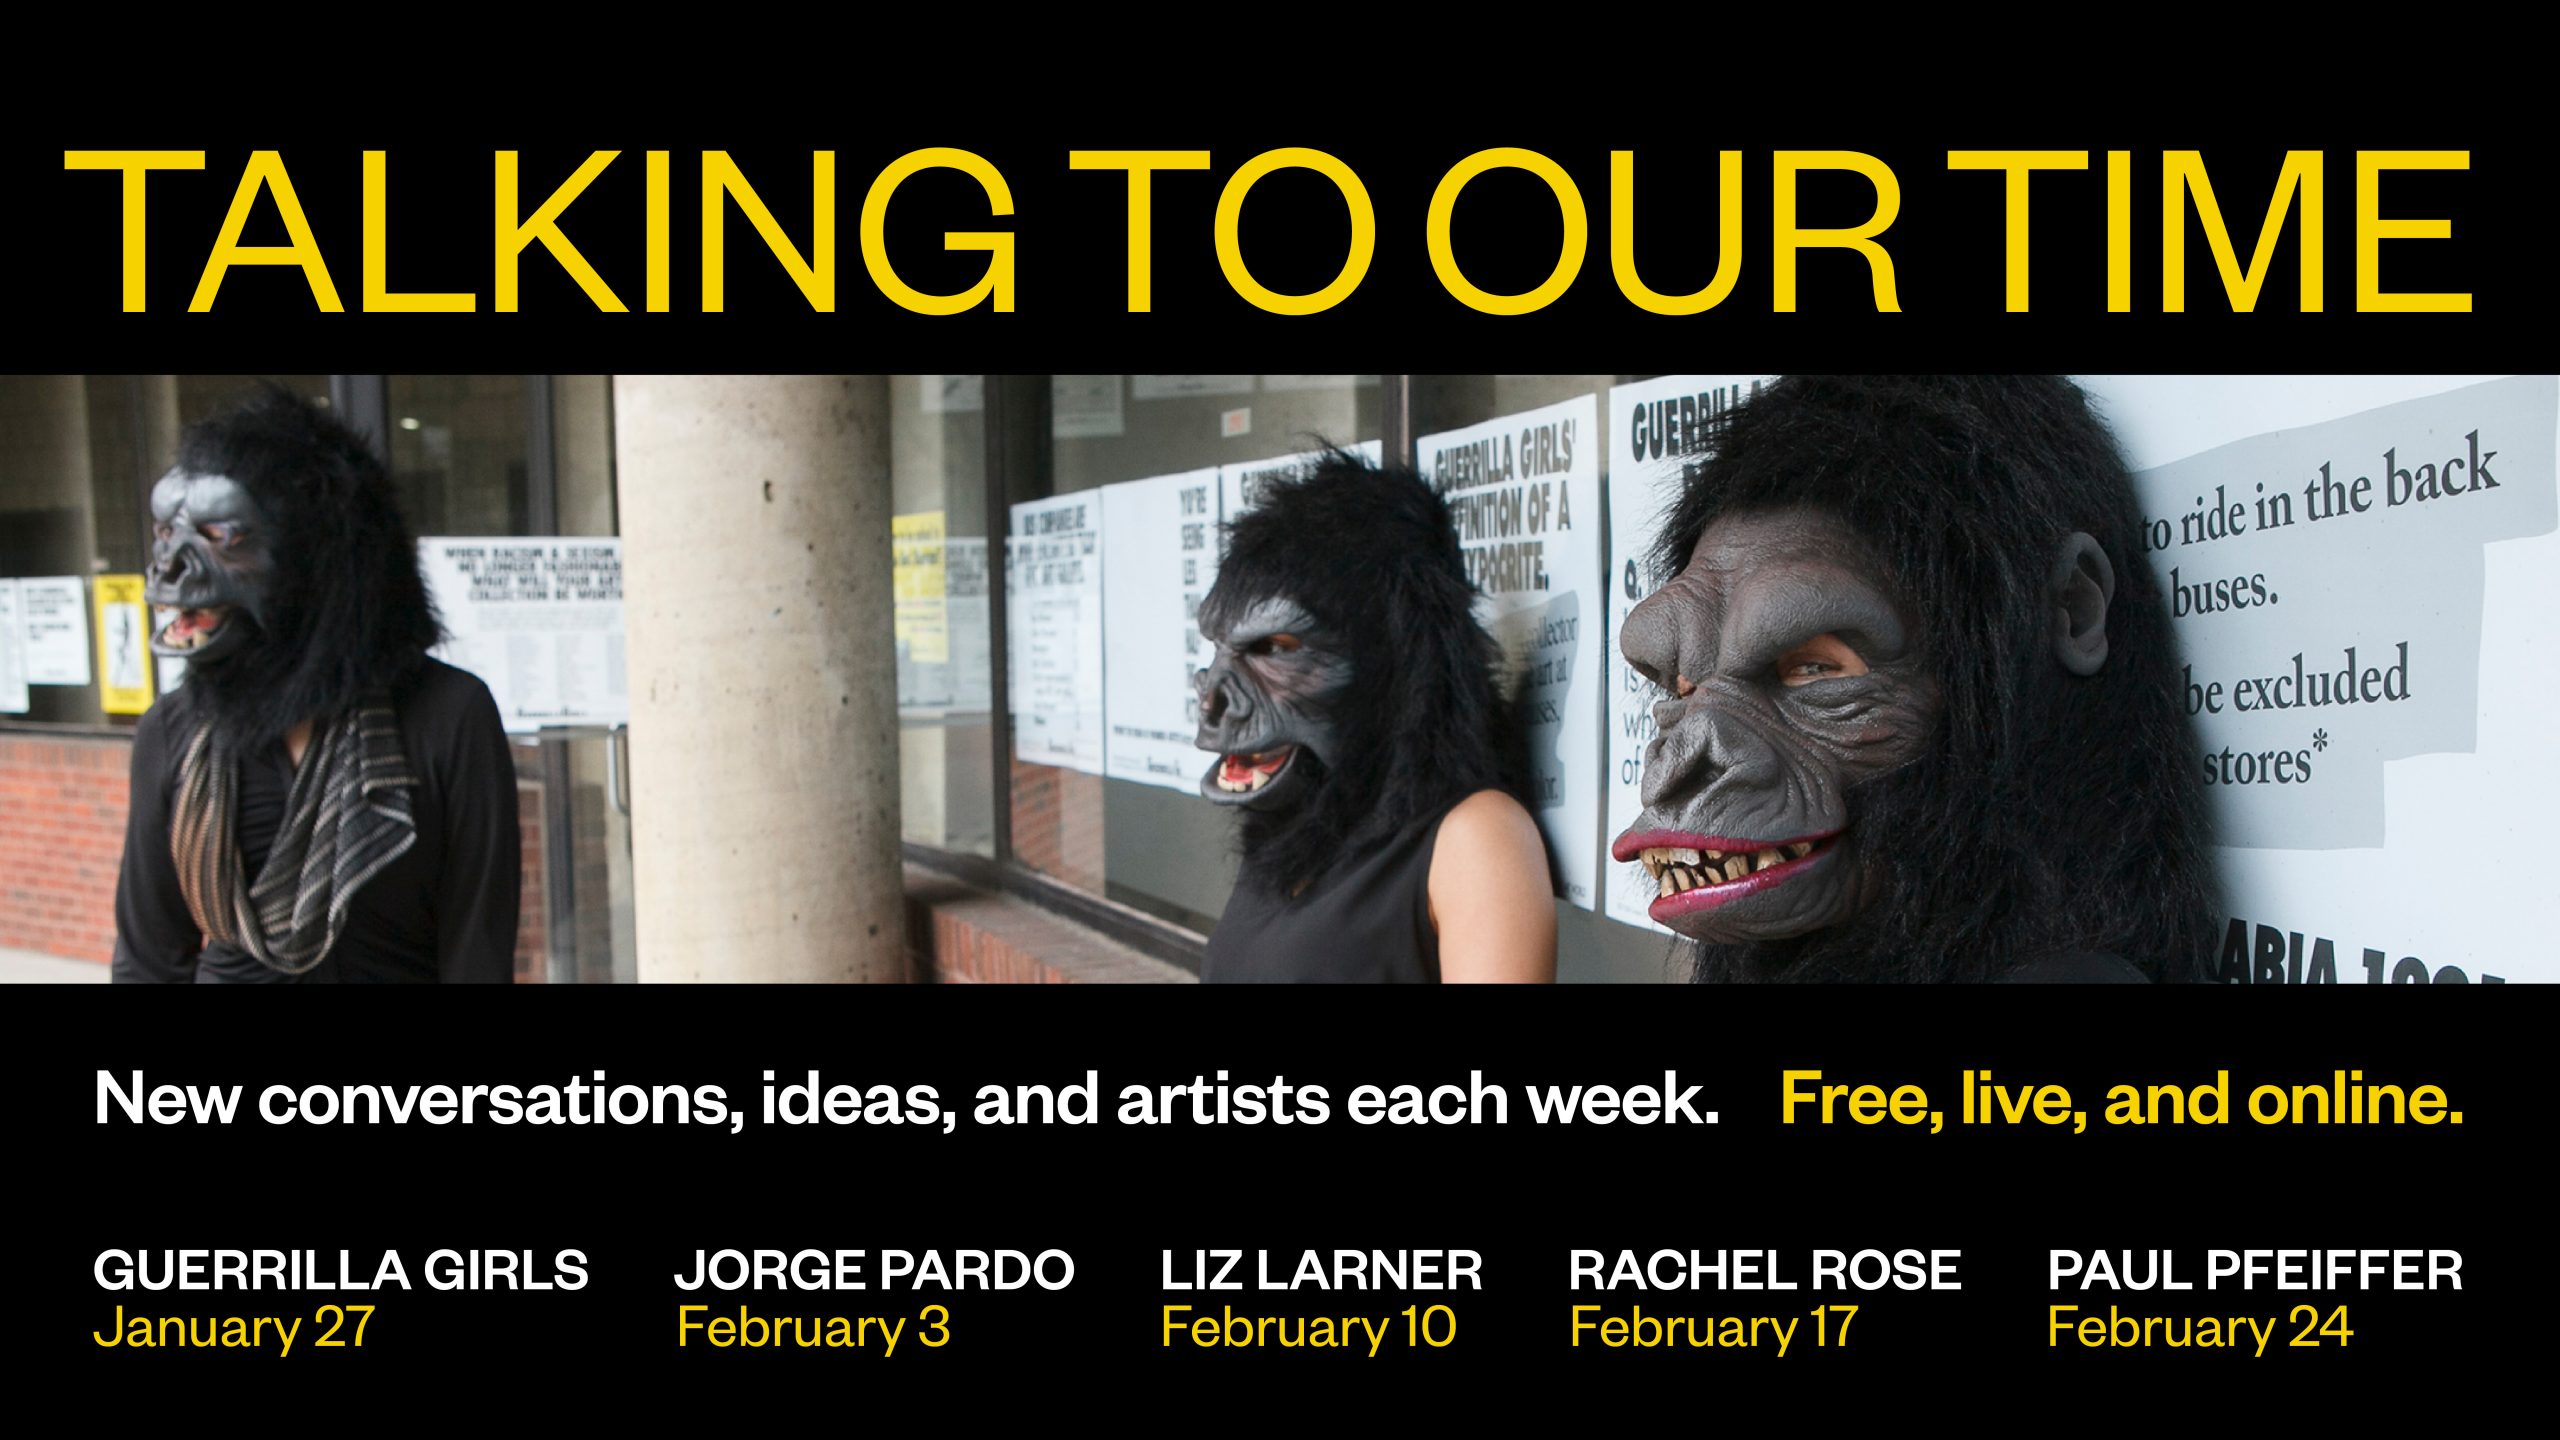 Picture of three individuals wearing gorilla masks. Text reads "Talking to our time. New conversations, ideas, and artists each week. Free, live and online..."